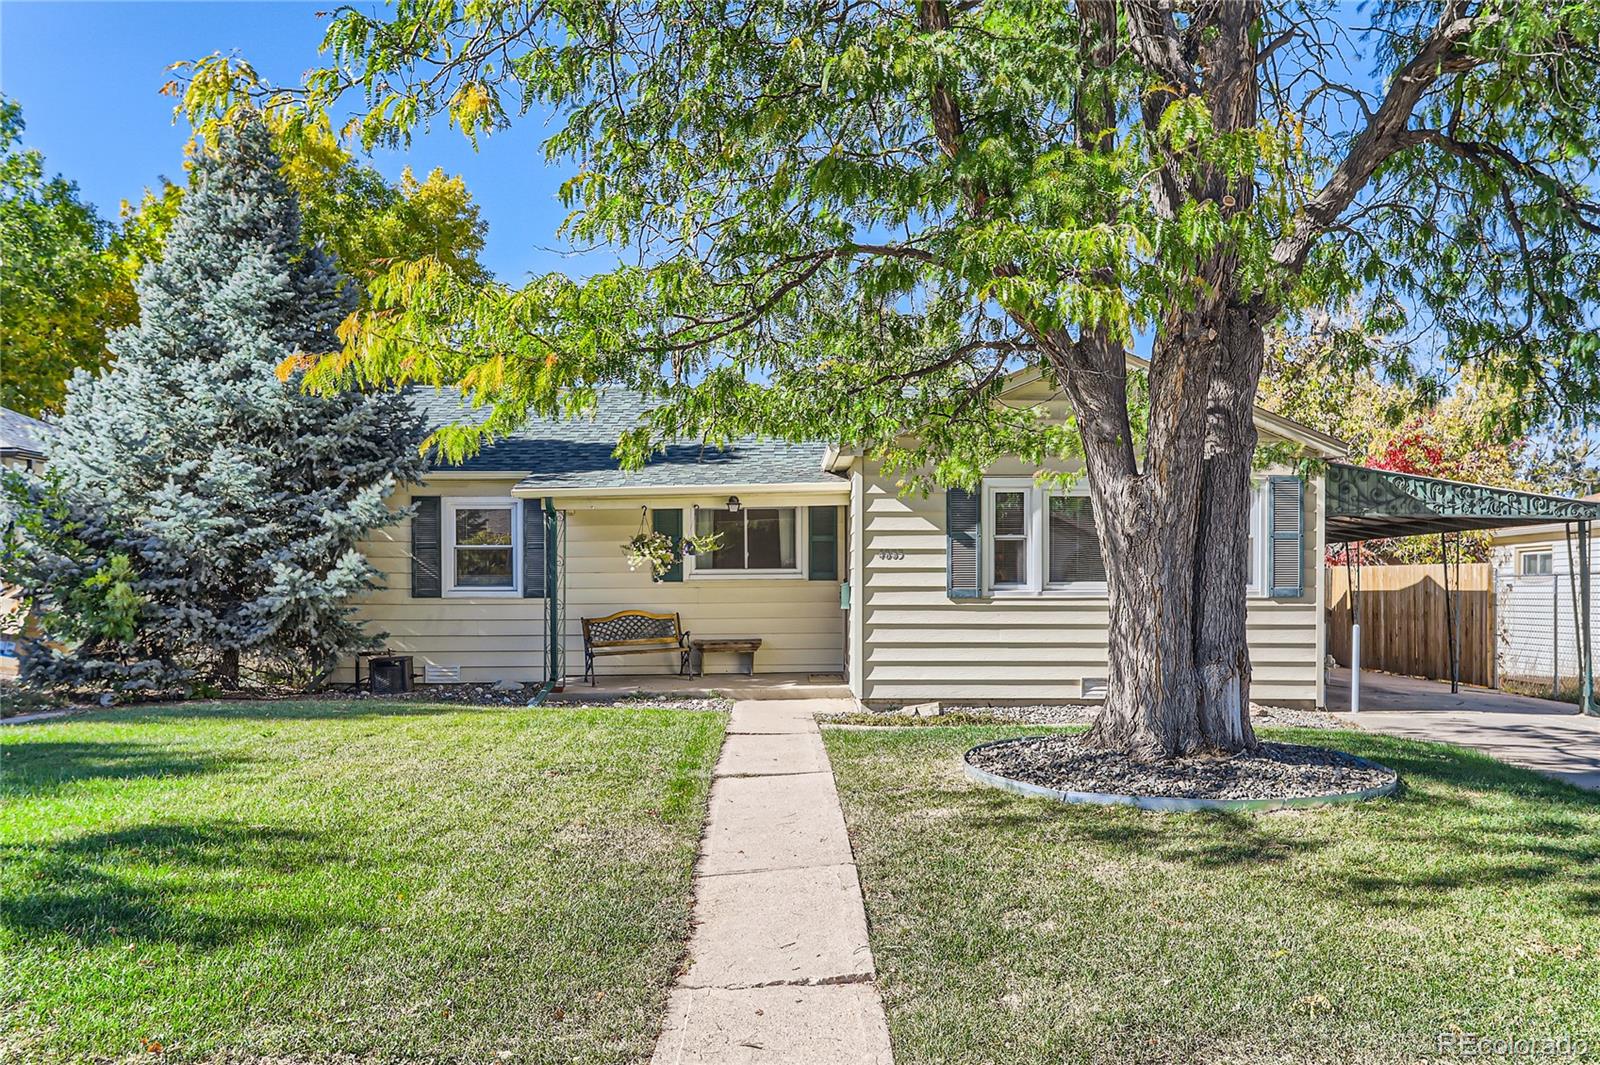 4883 w gill place, Denver sold home. Closed on 2024-01-25 for $485,000.